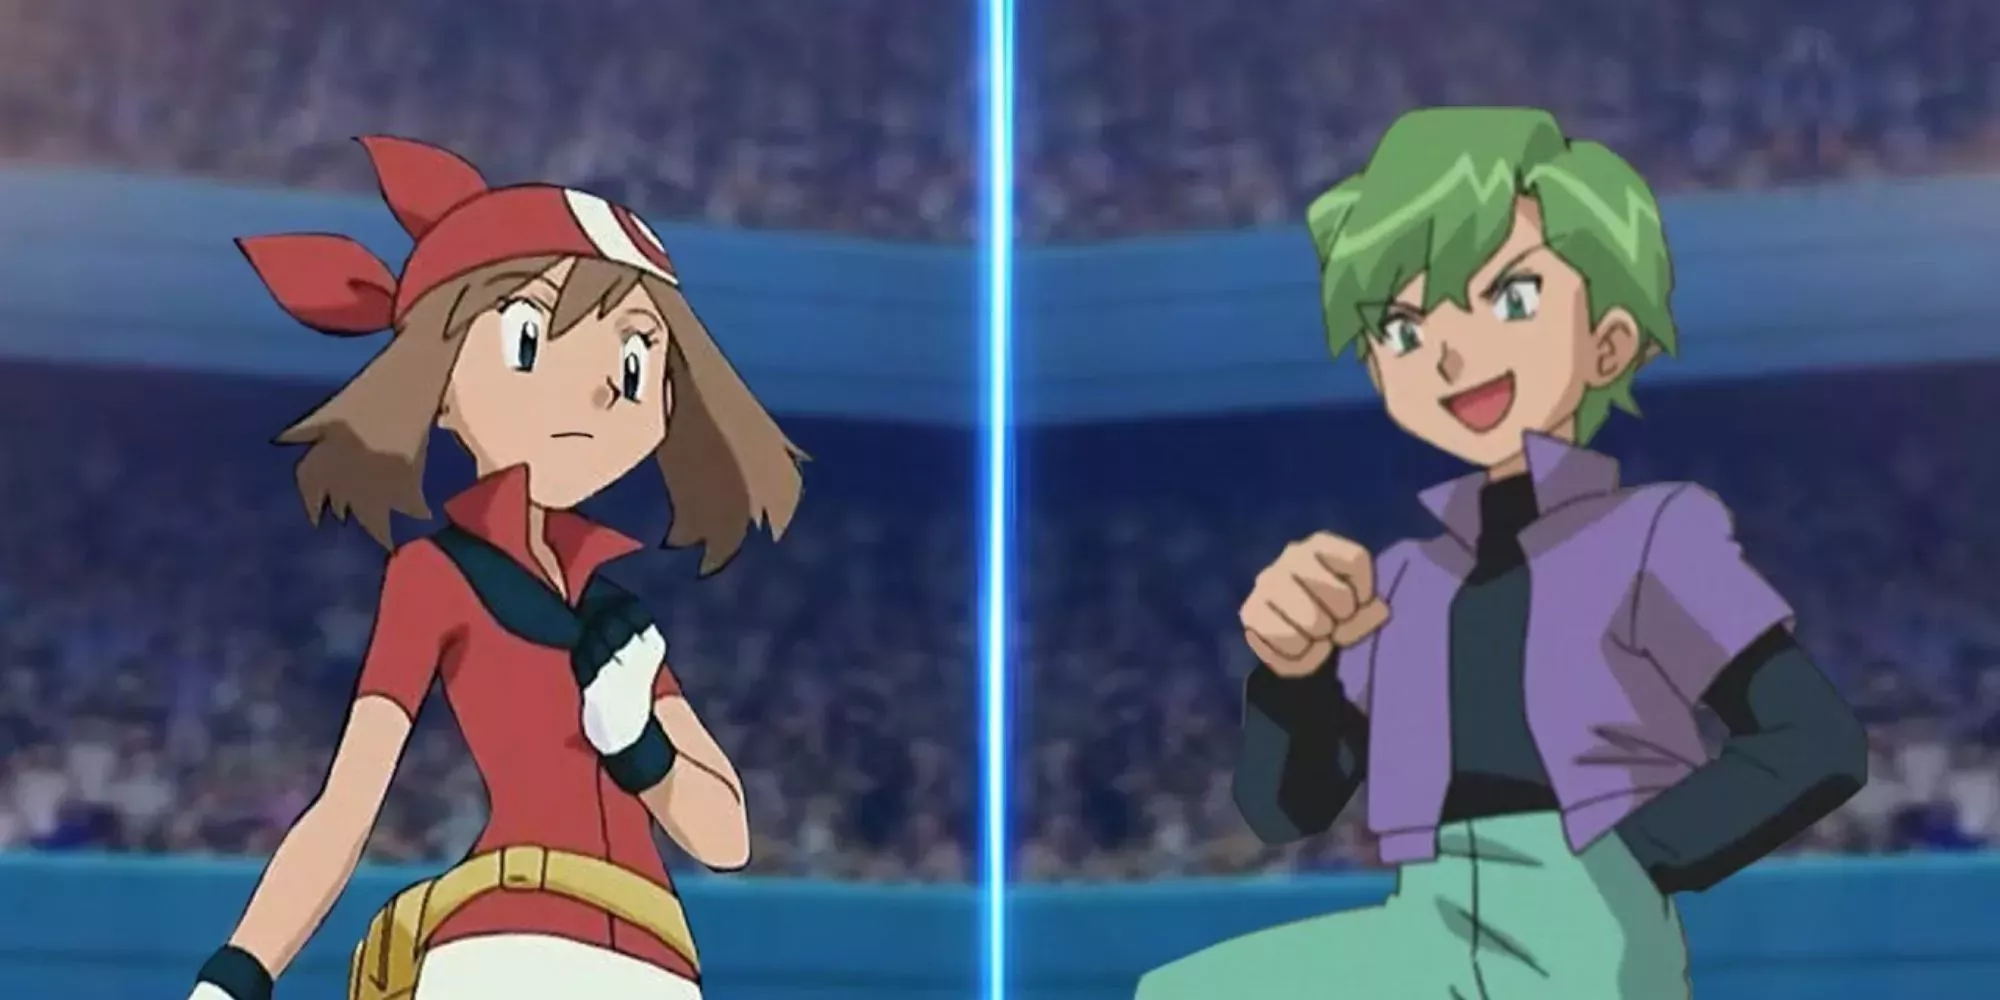 May is pitted against her rival Drew in Pokemon Advanced